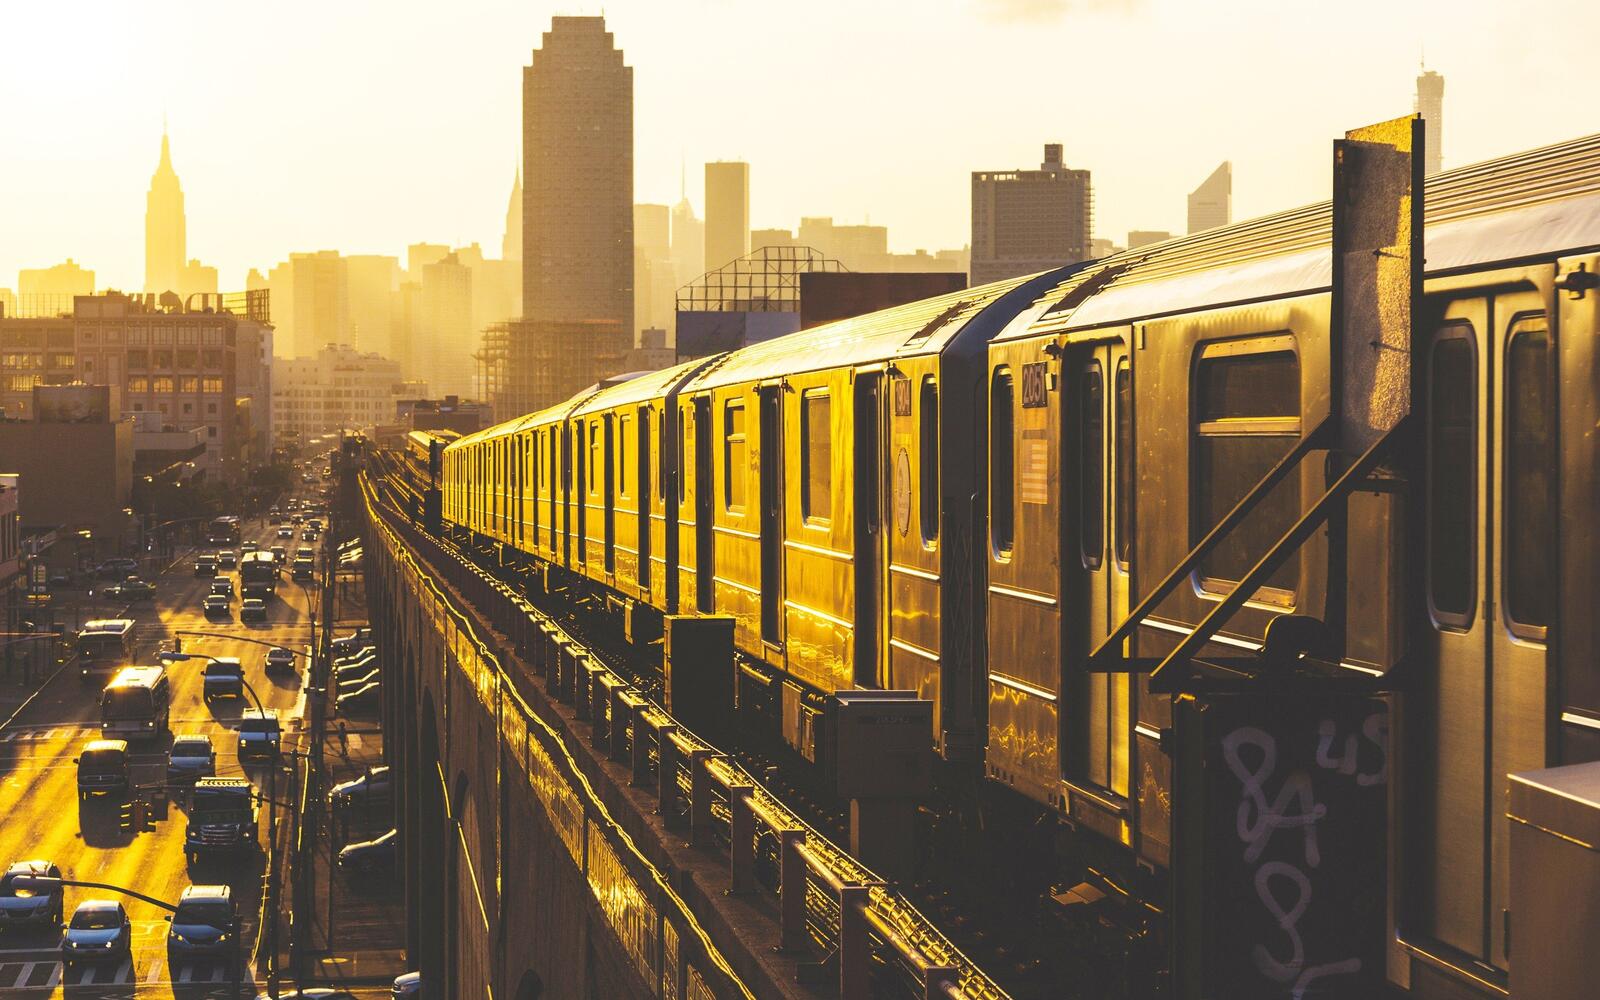 Wallpapers New York train landscapes on the desktop